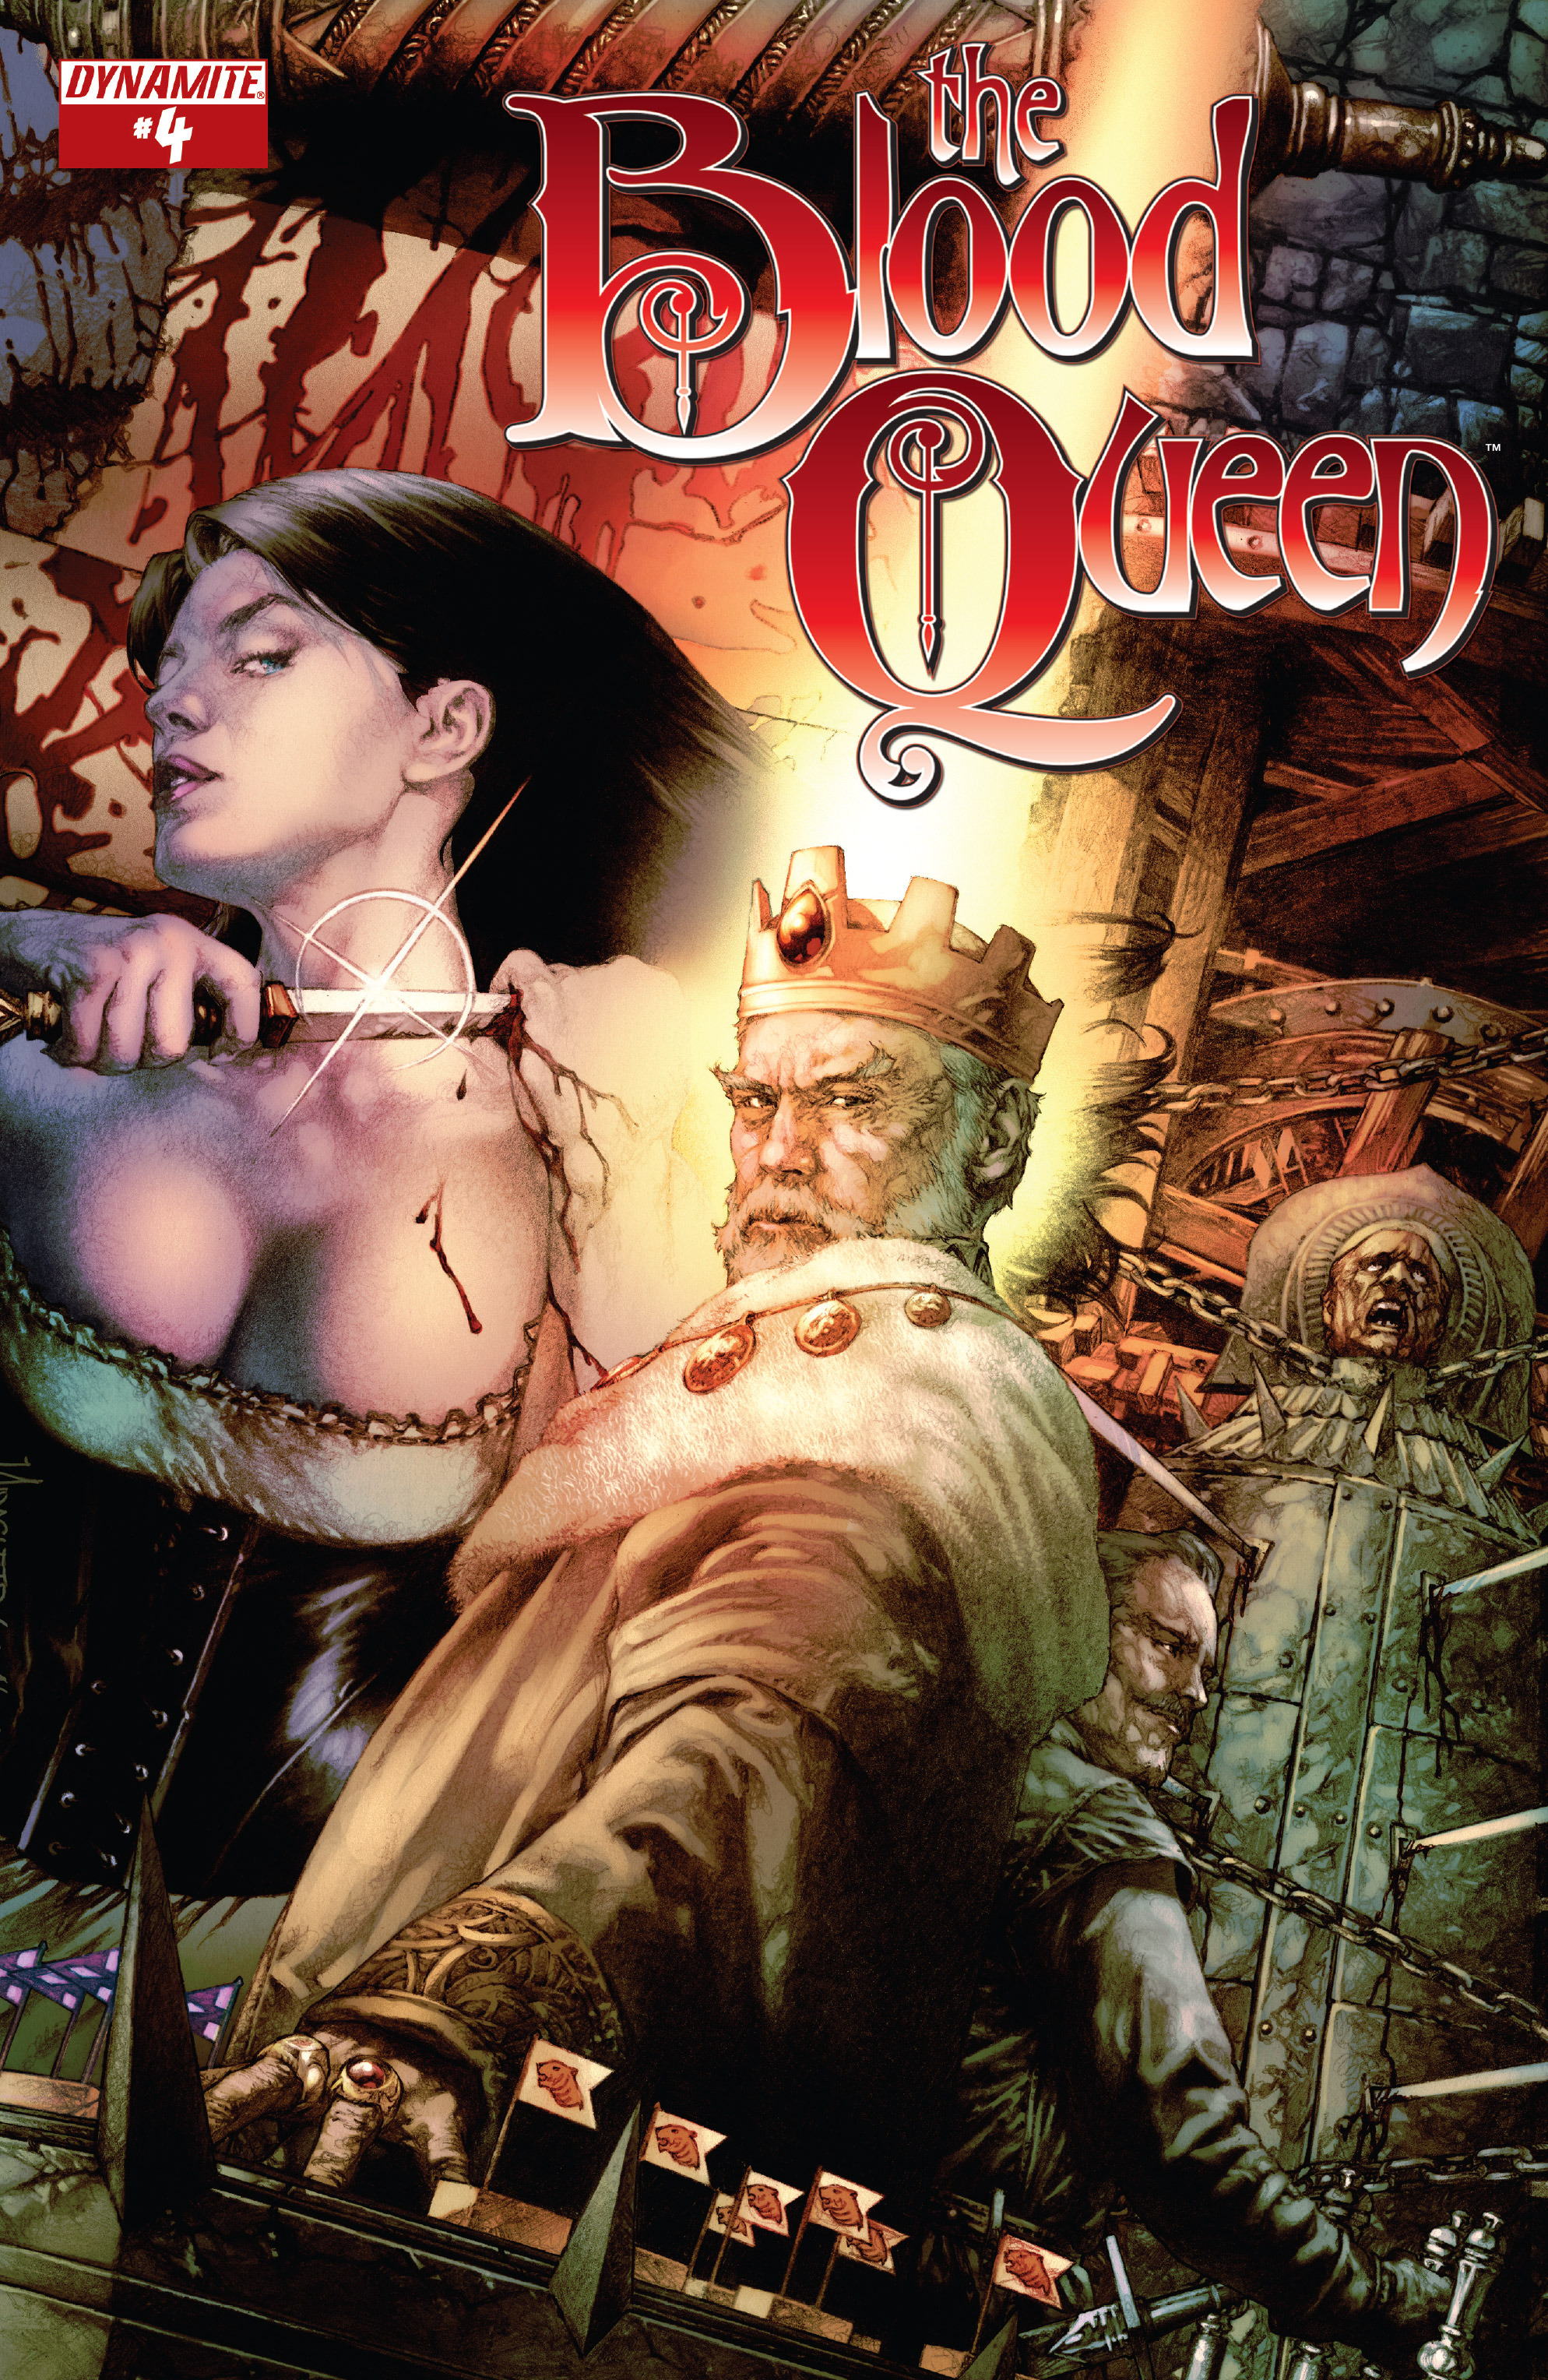 Read online The Blood Queen comic -  Issue #4 - 1